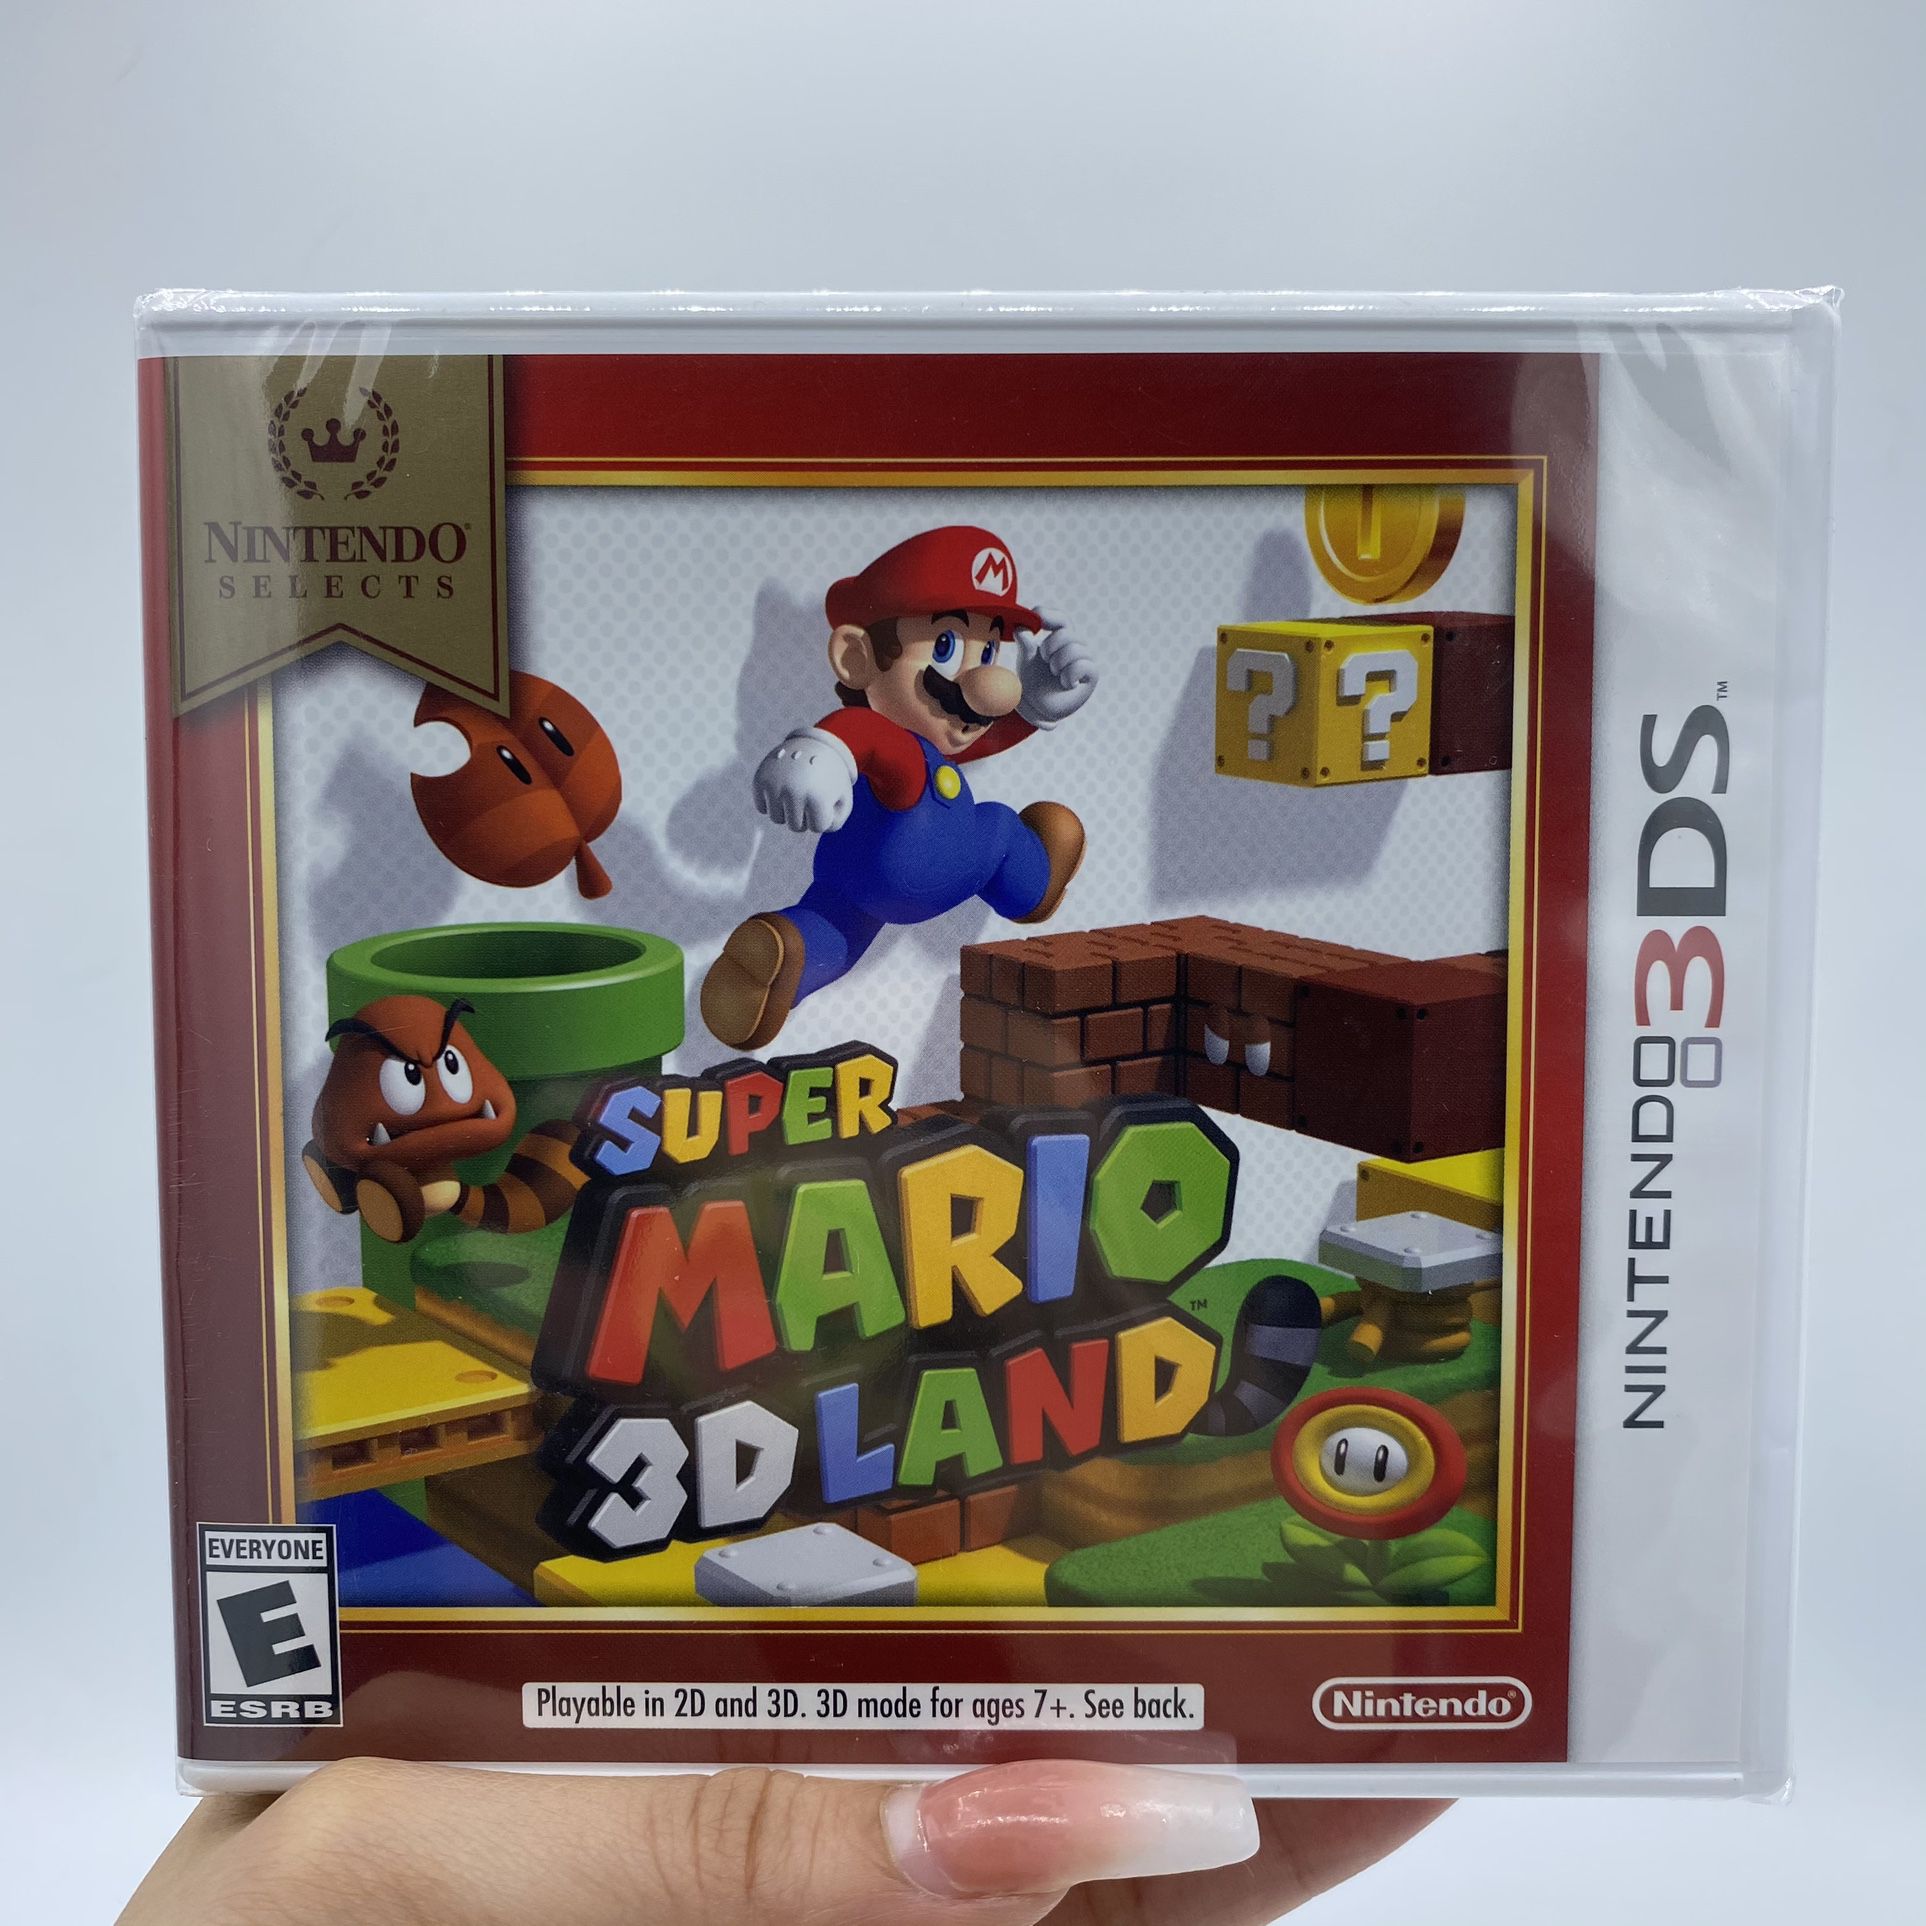 Super Mario 3D Land Nintendo Selects (Nintendo 3DS) - Brand New Sealed